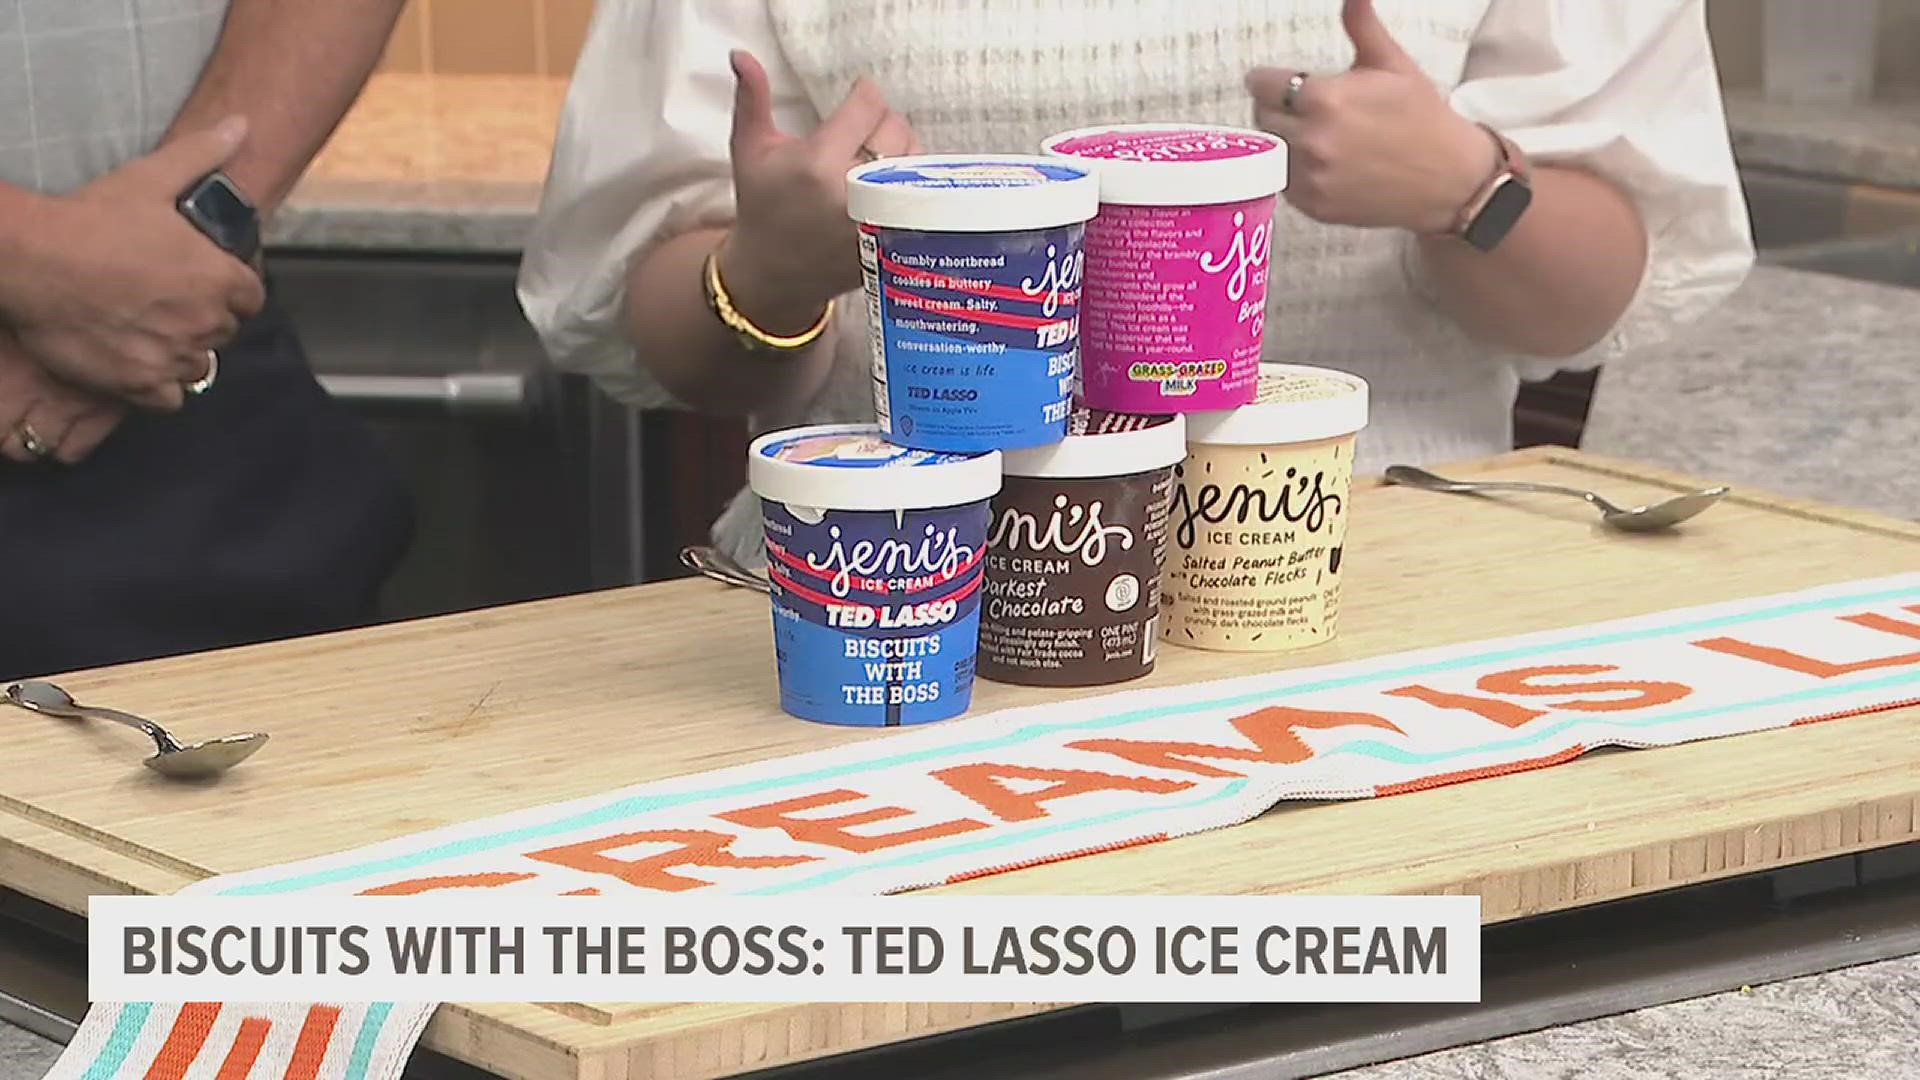 The new Ted Lasso ice cream you can try before season 3 comes out